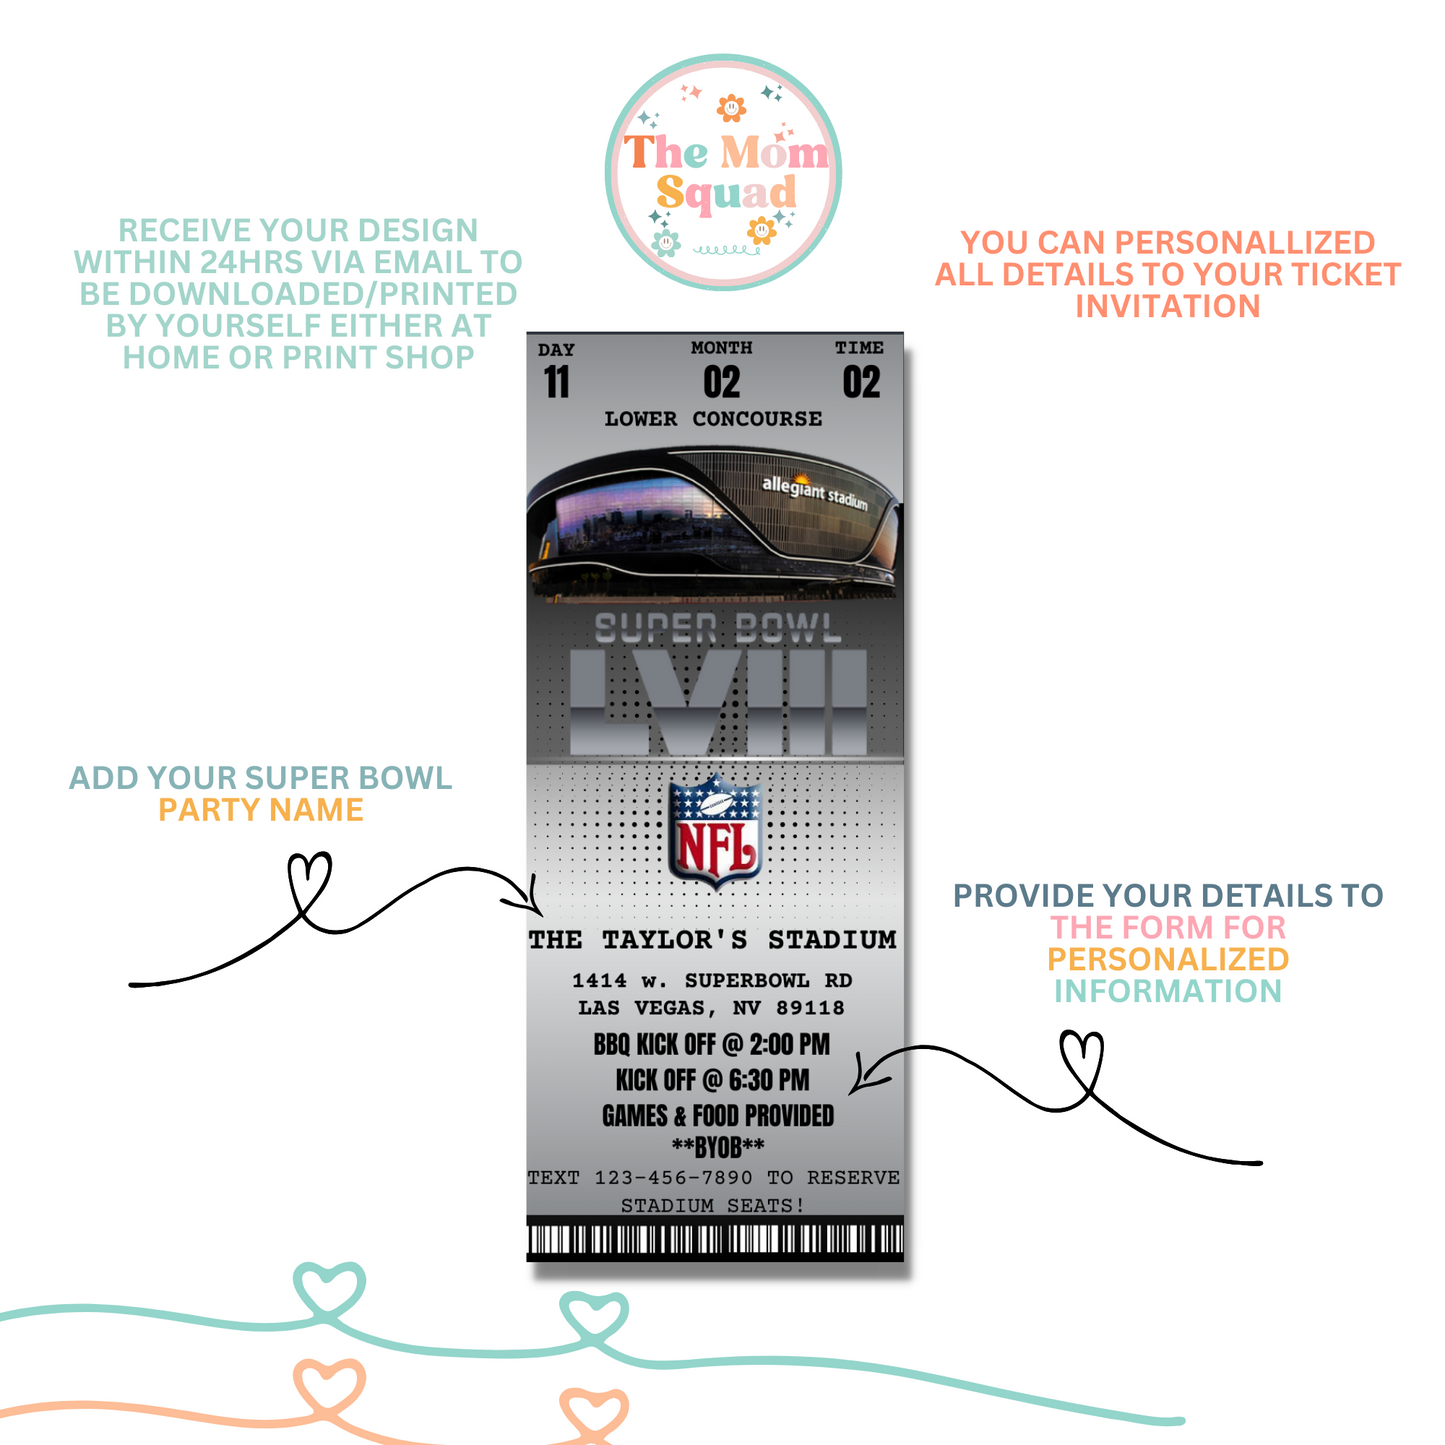 Super Bowl Party Ticket Invitation - Score Your Spot at the Ultimate Super Bowl Watch Party: Touchdowns, Tailgates, and Unmatched Excitement Await!